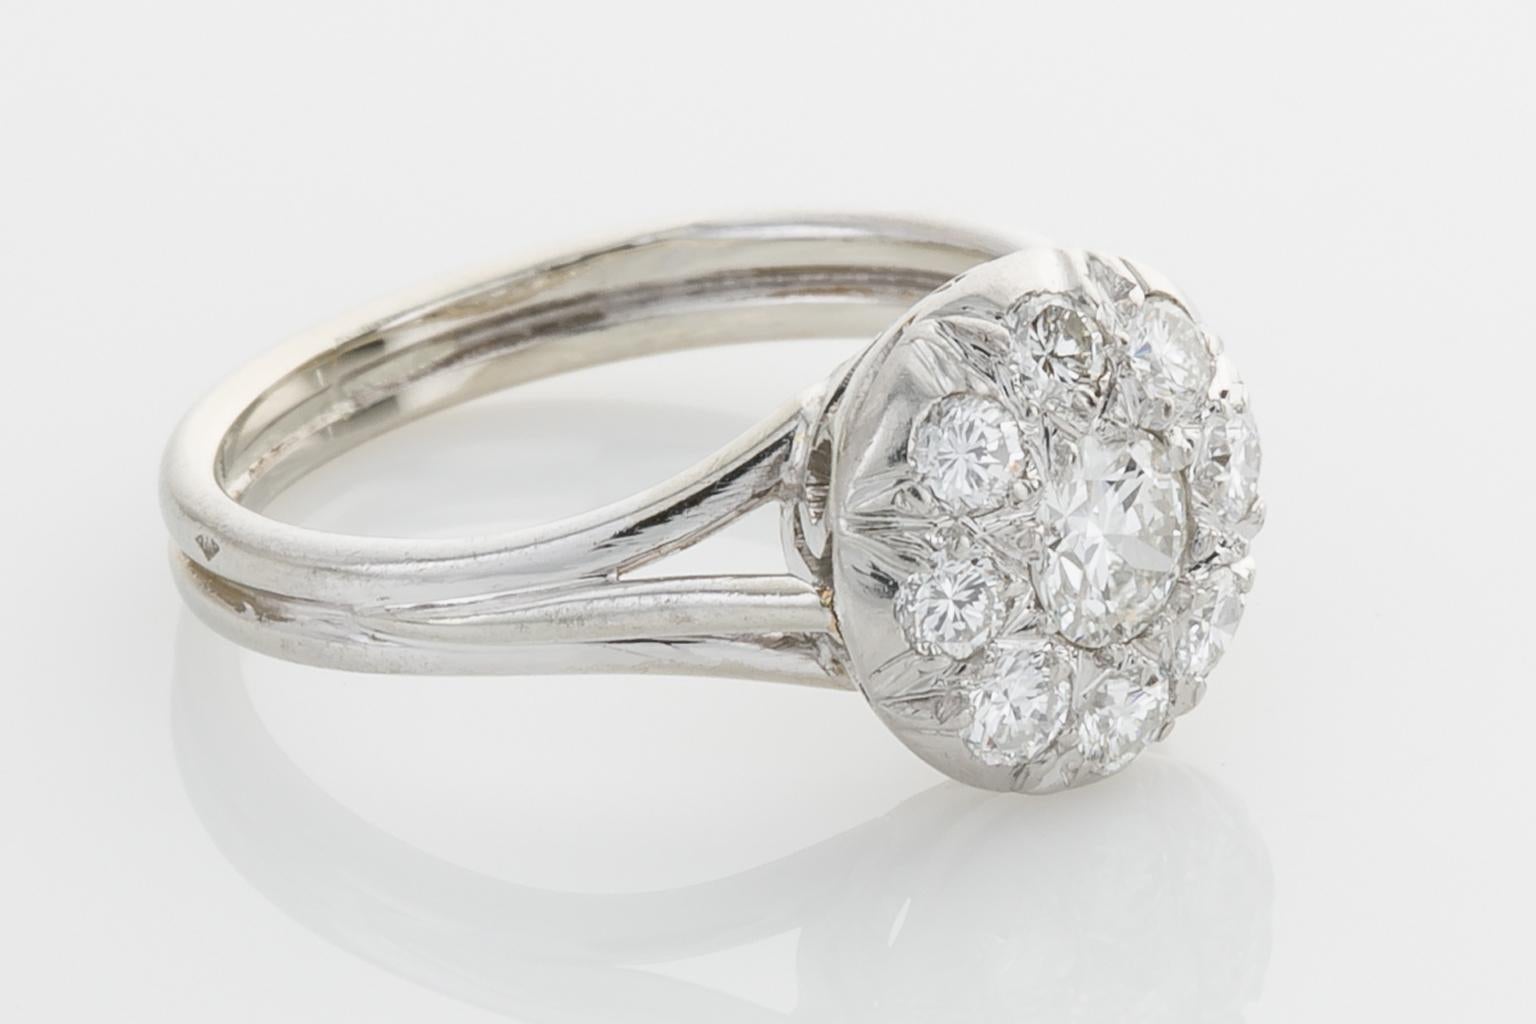 The perfect cluster ring - not too big and not too small, it's just right and it's French. Set with a central old cut diamond weighing approximately 0.28cts surrounded by 8 round cut diamonds weighing another 0.40cts (estimated), the ring is mounted